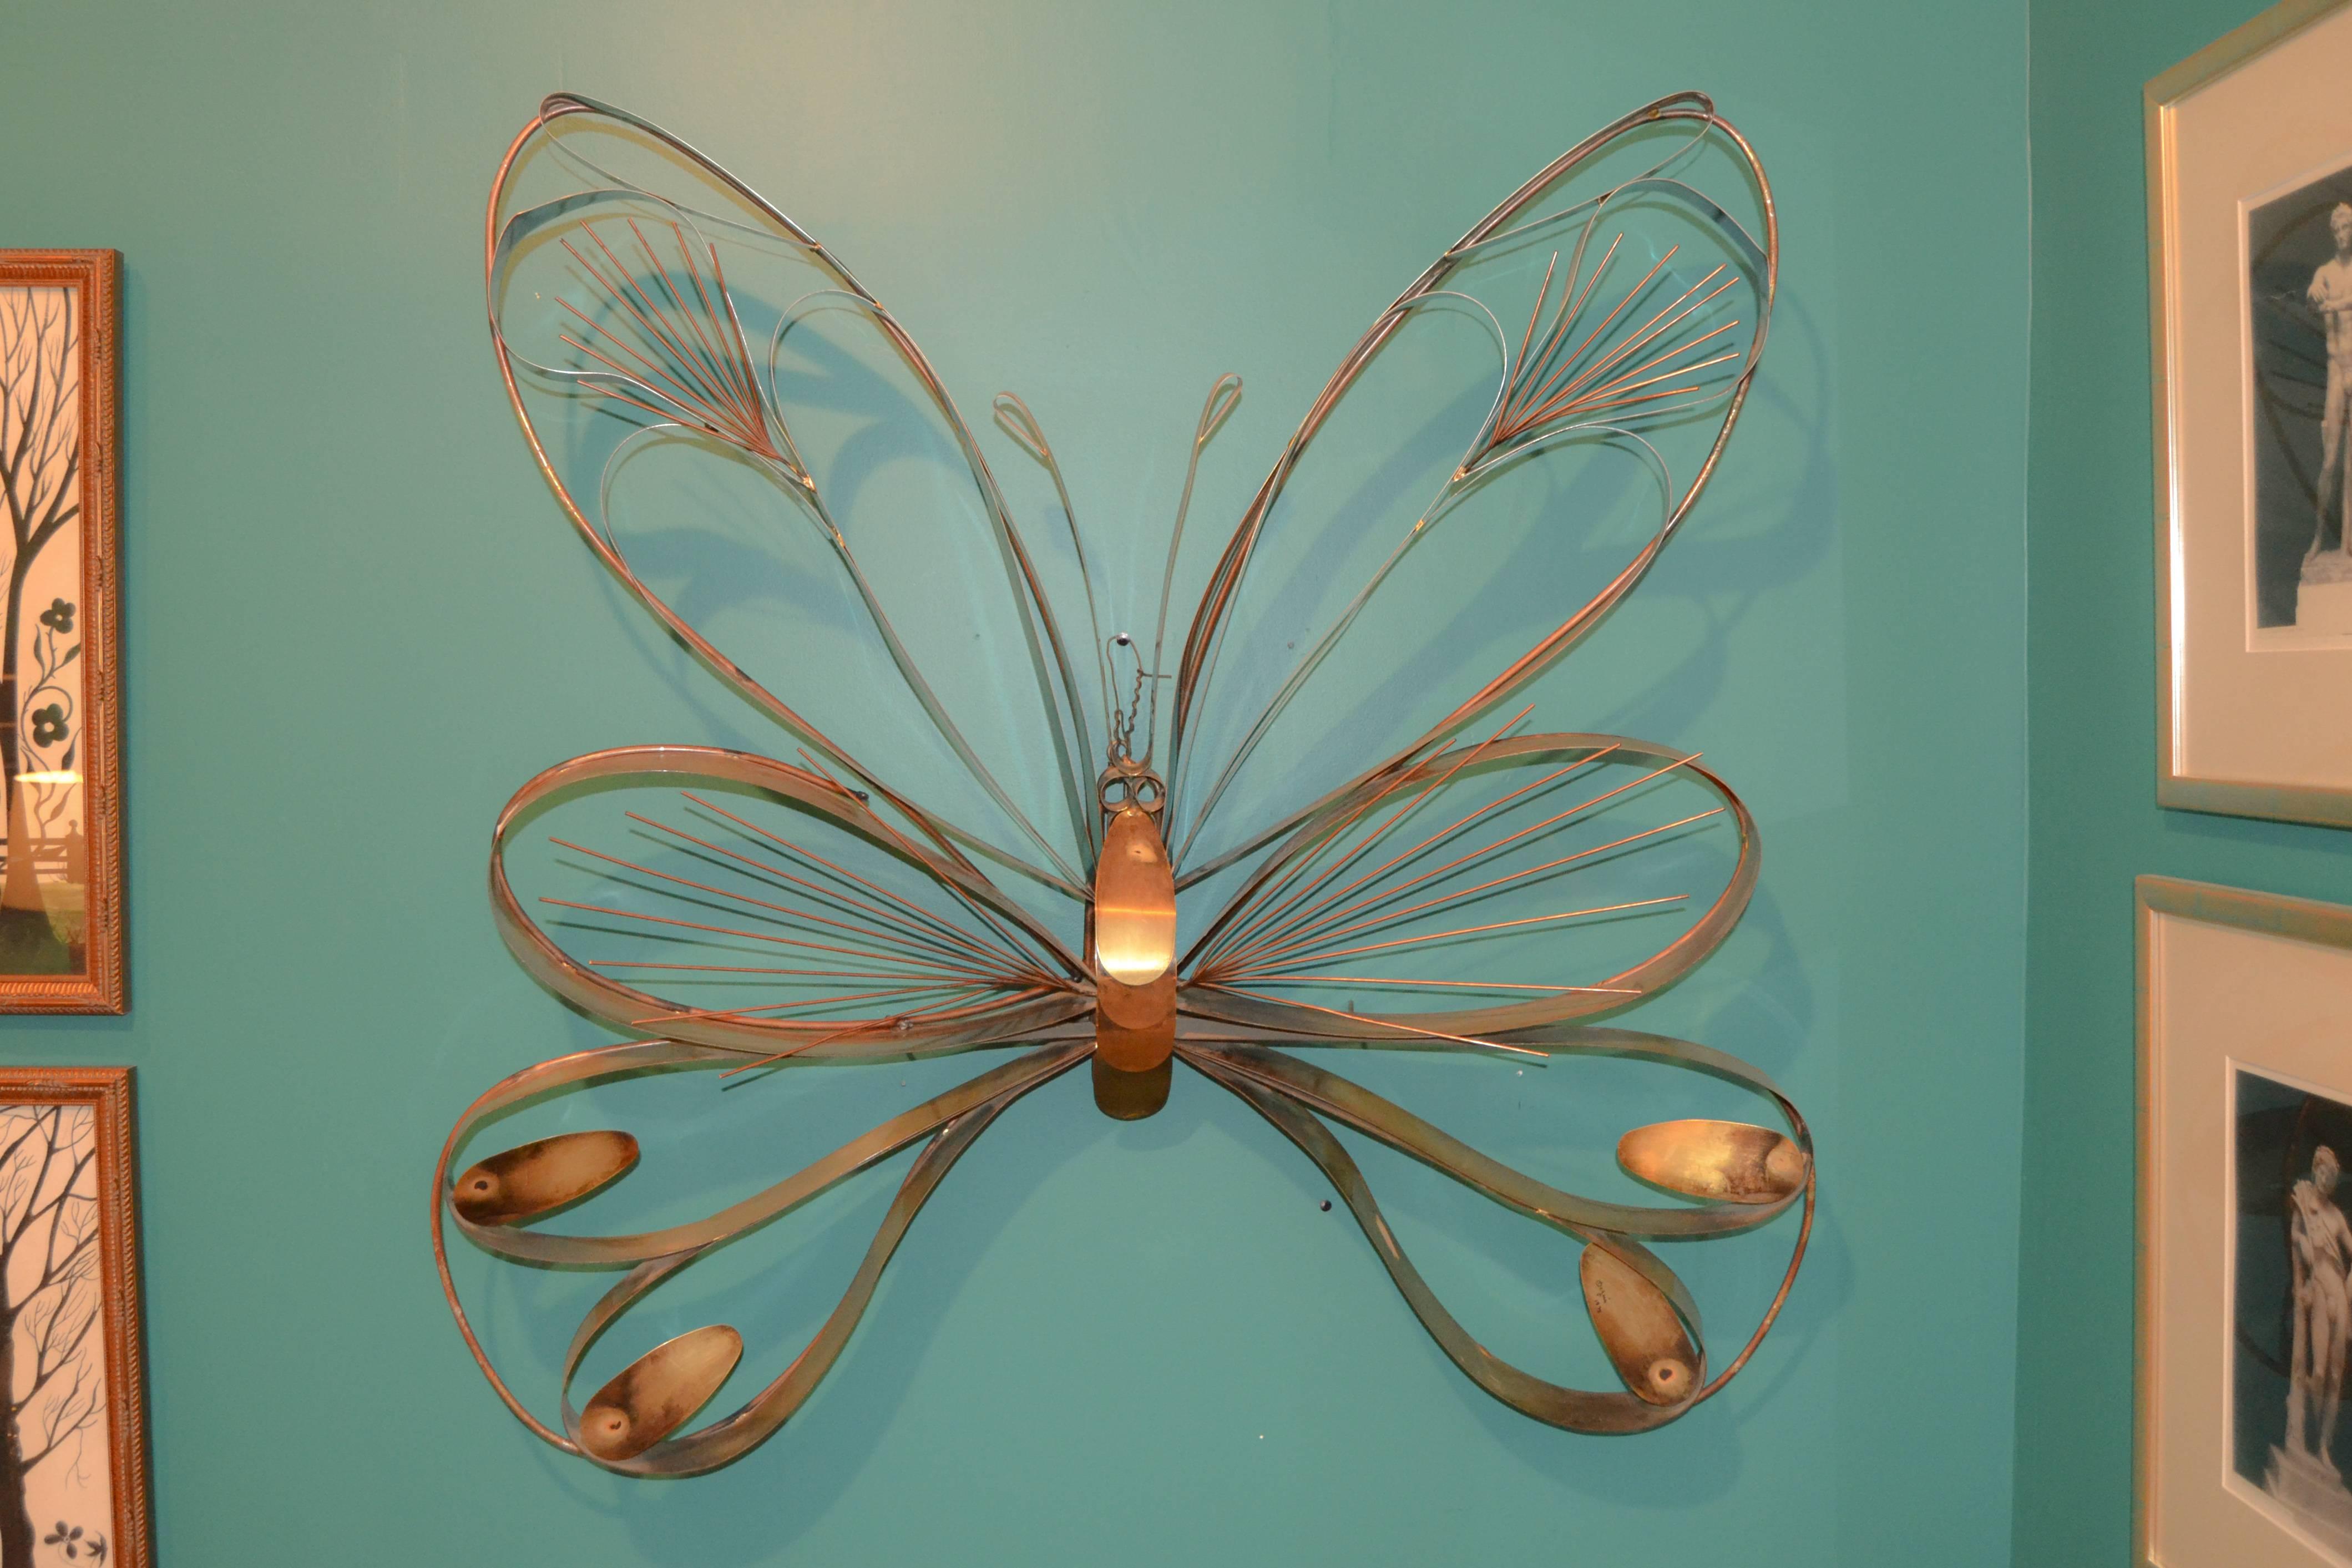 Stamped signature, Curtis Jere. Butterfly sculpture by Artisan House. Brass with copper accents. One of the most light hearted of the Jere sculptures.